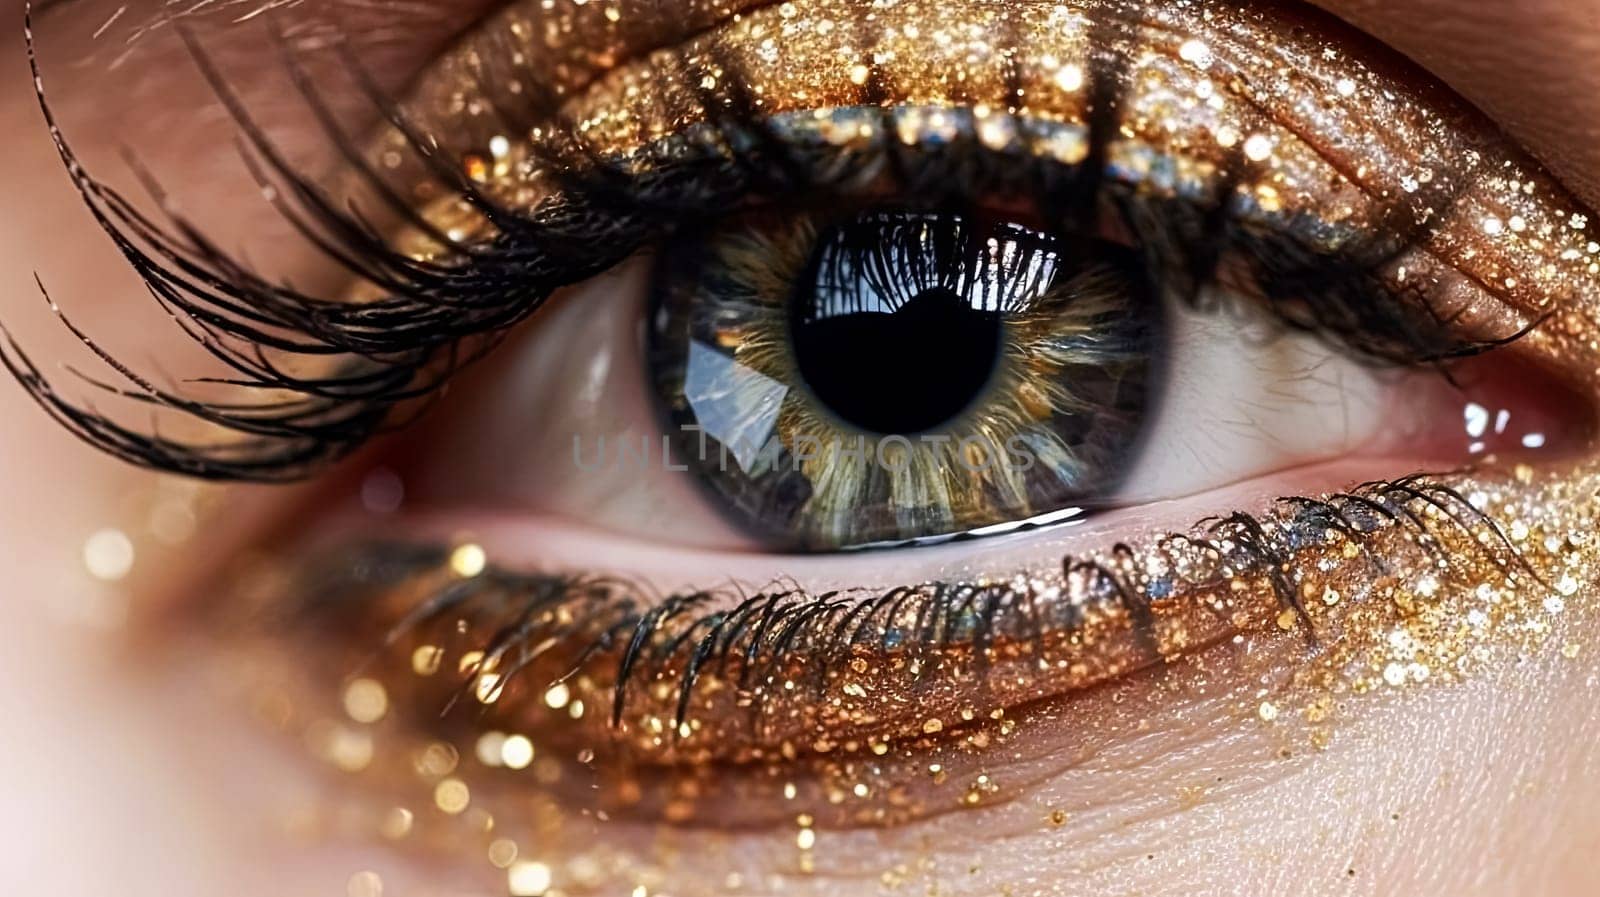 A woman's eye is painted with blue and gold glitter. The eye is the main focus of the image, and the glitter adds a touch of glamour and sophistication